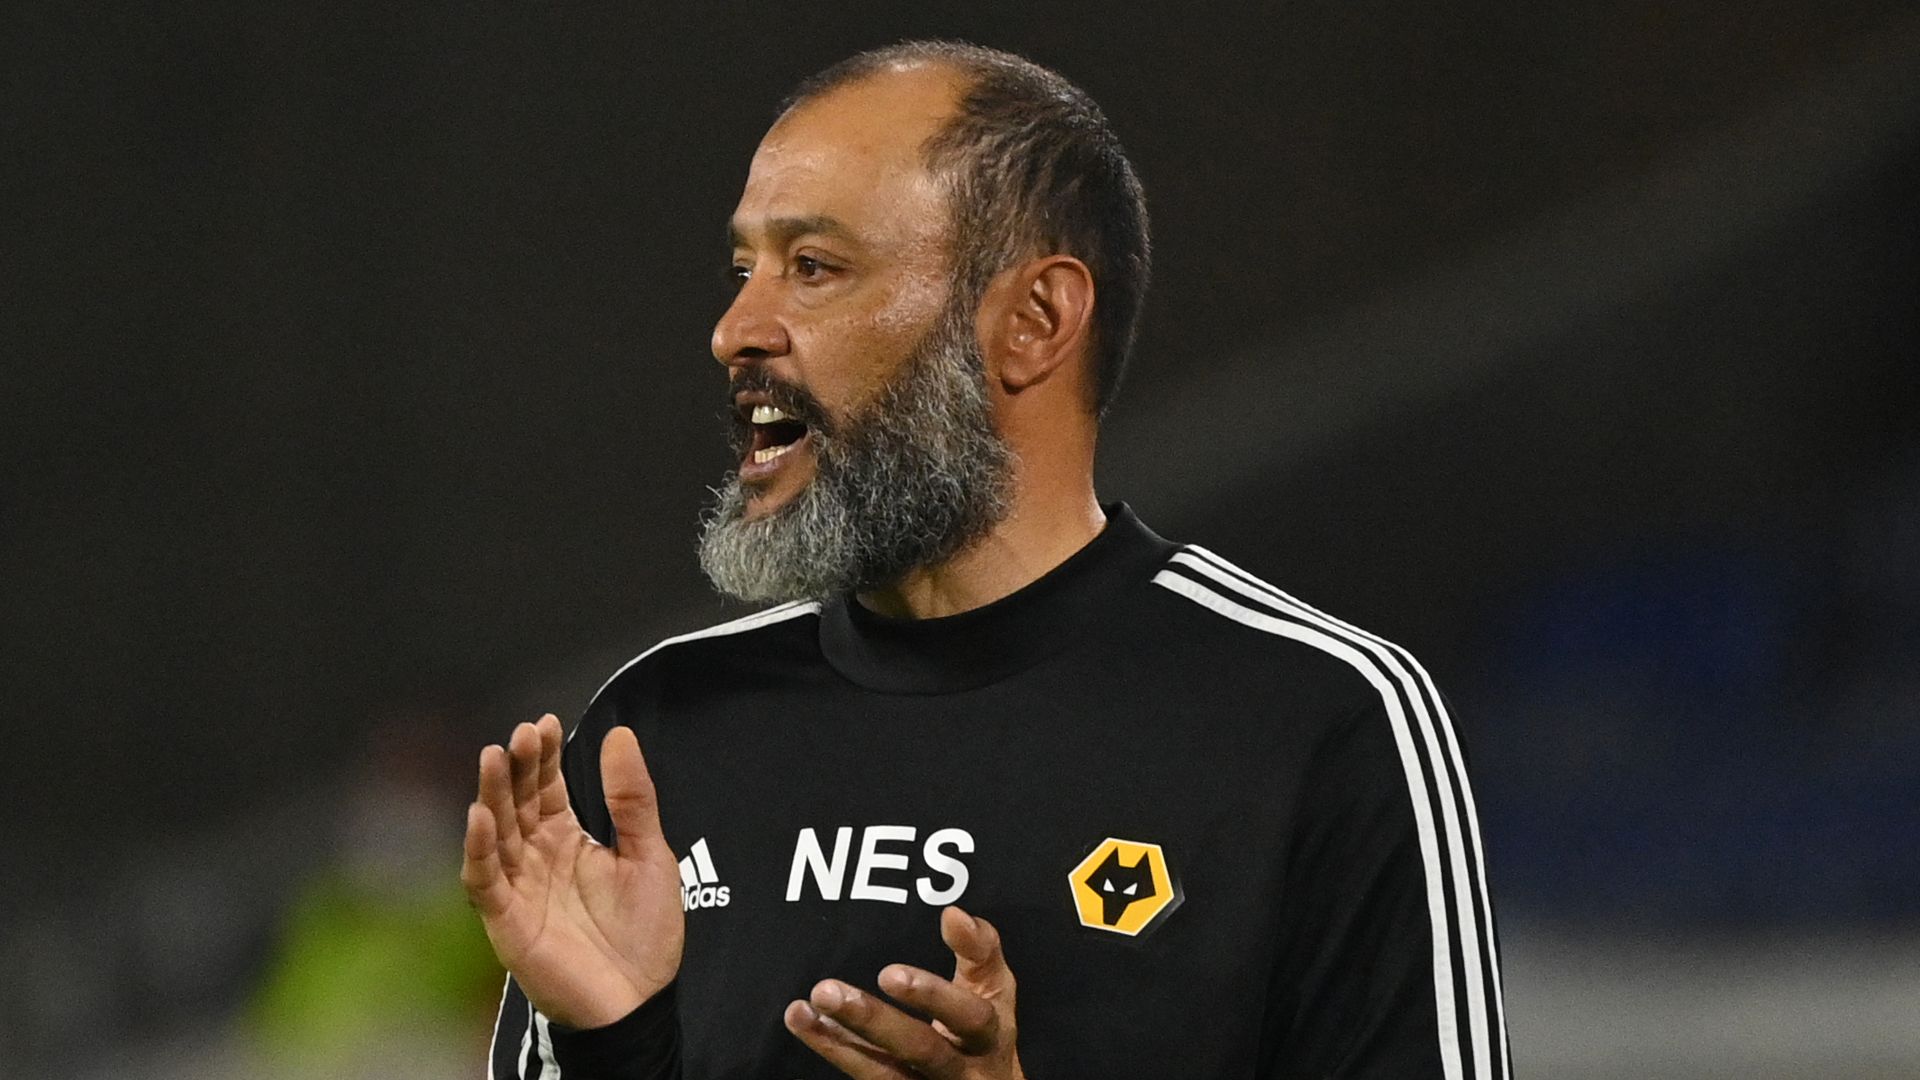 Nuno after 383-day season: We need more players